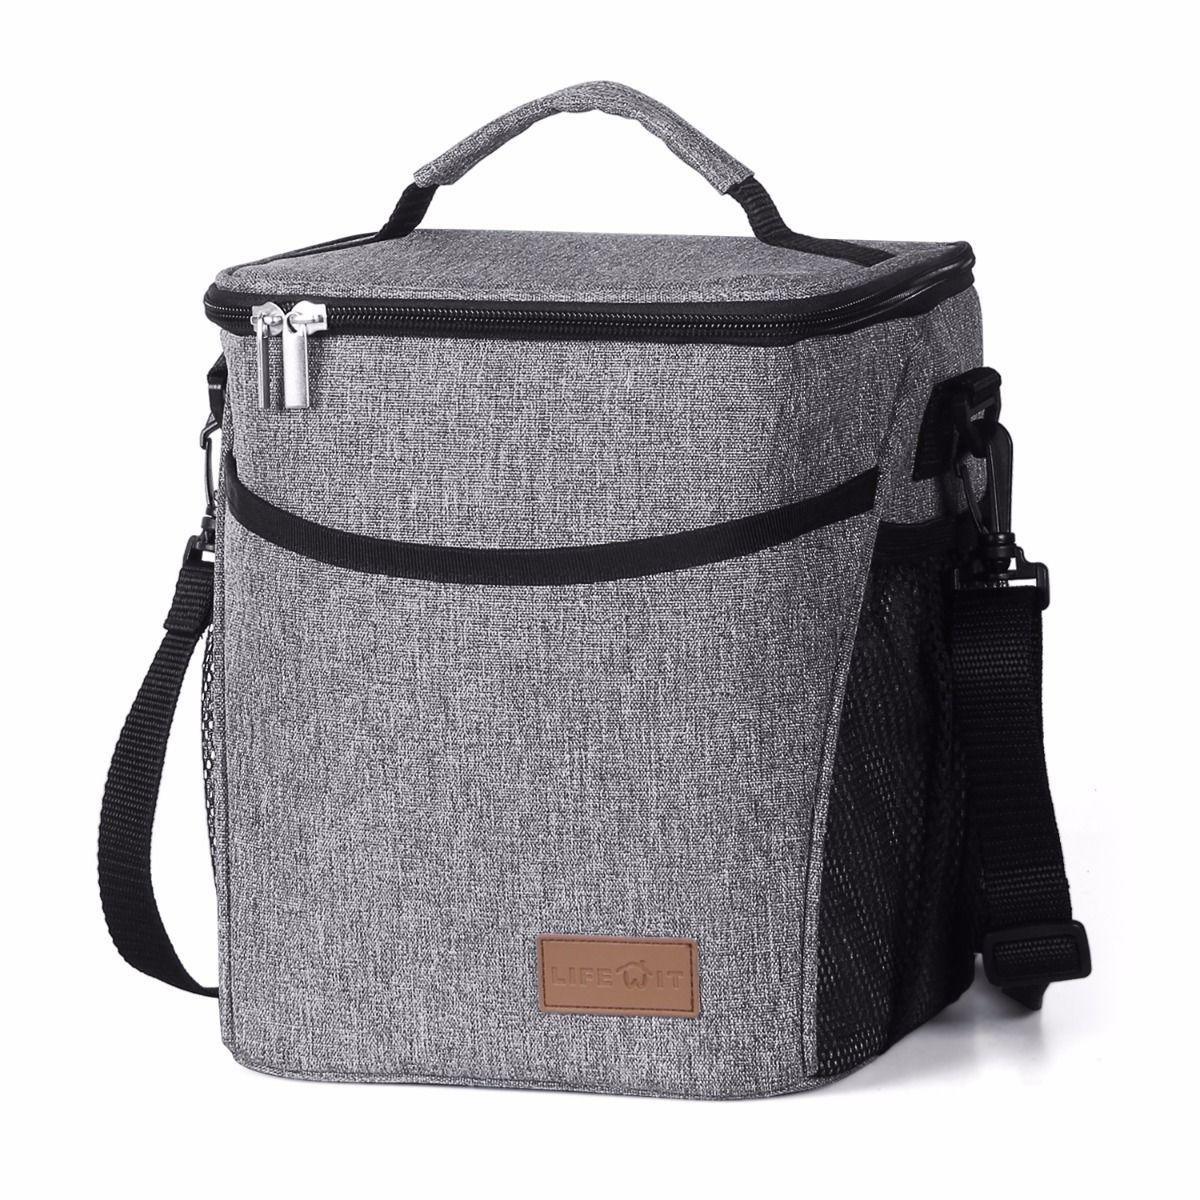 Tote Hot Cold Insulated Thermal Cooler Travel Work Picnic School Lunch Box Bag Travel Supplies